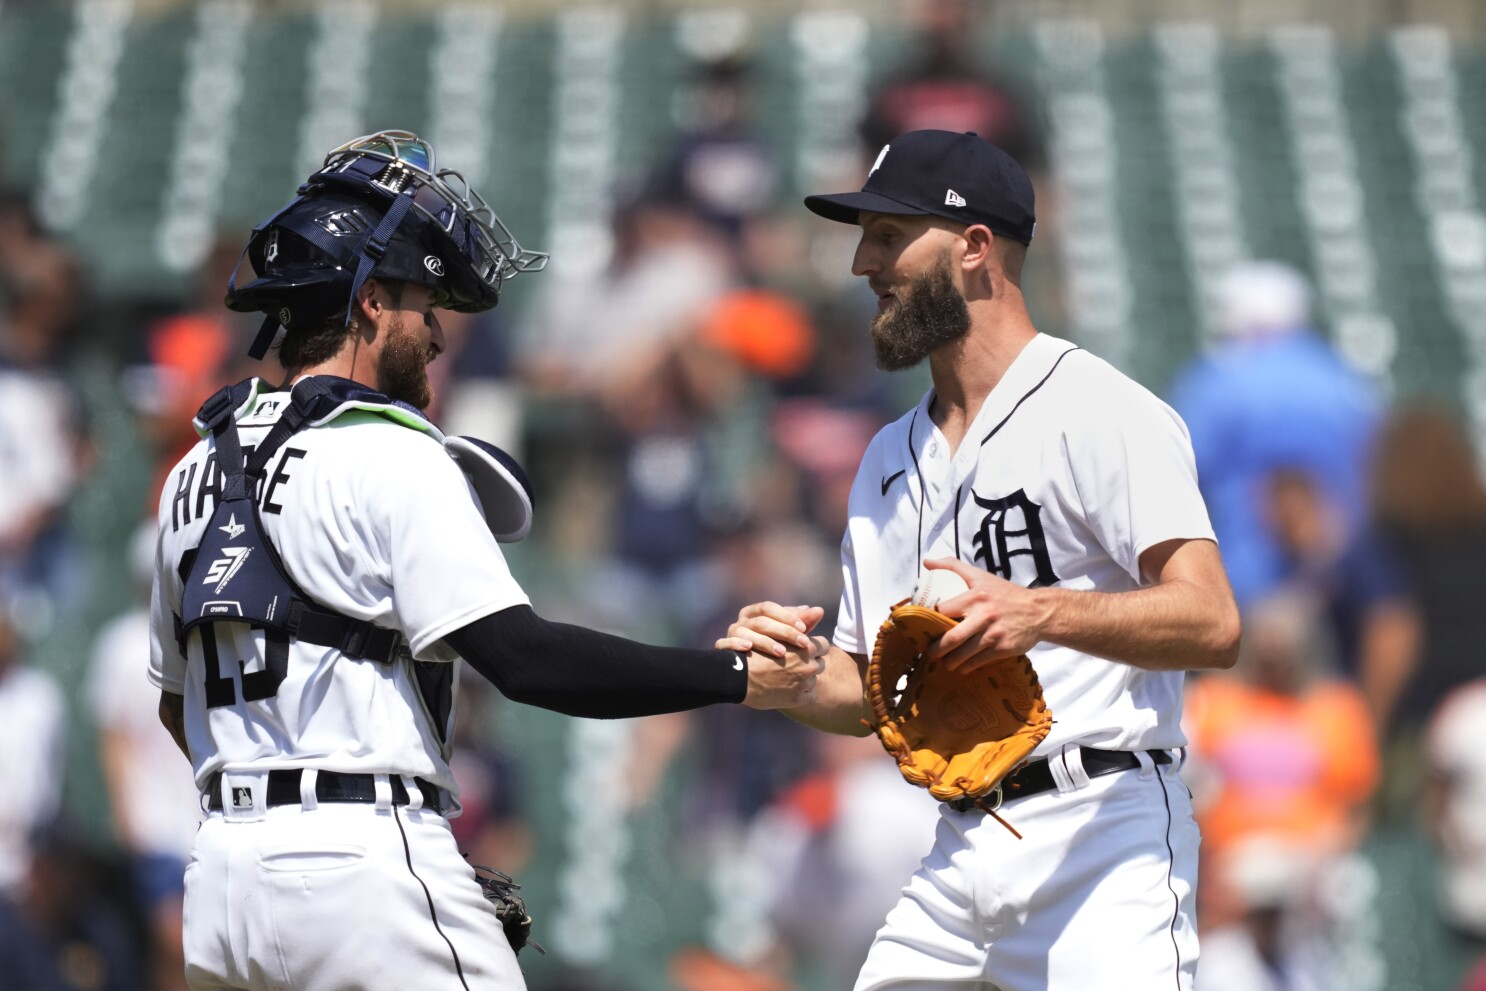 Báez's 2-run single in 1st starts Tigers to 9-0 rout of A's. 10th time  Oakland shut out